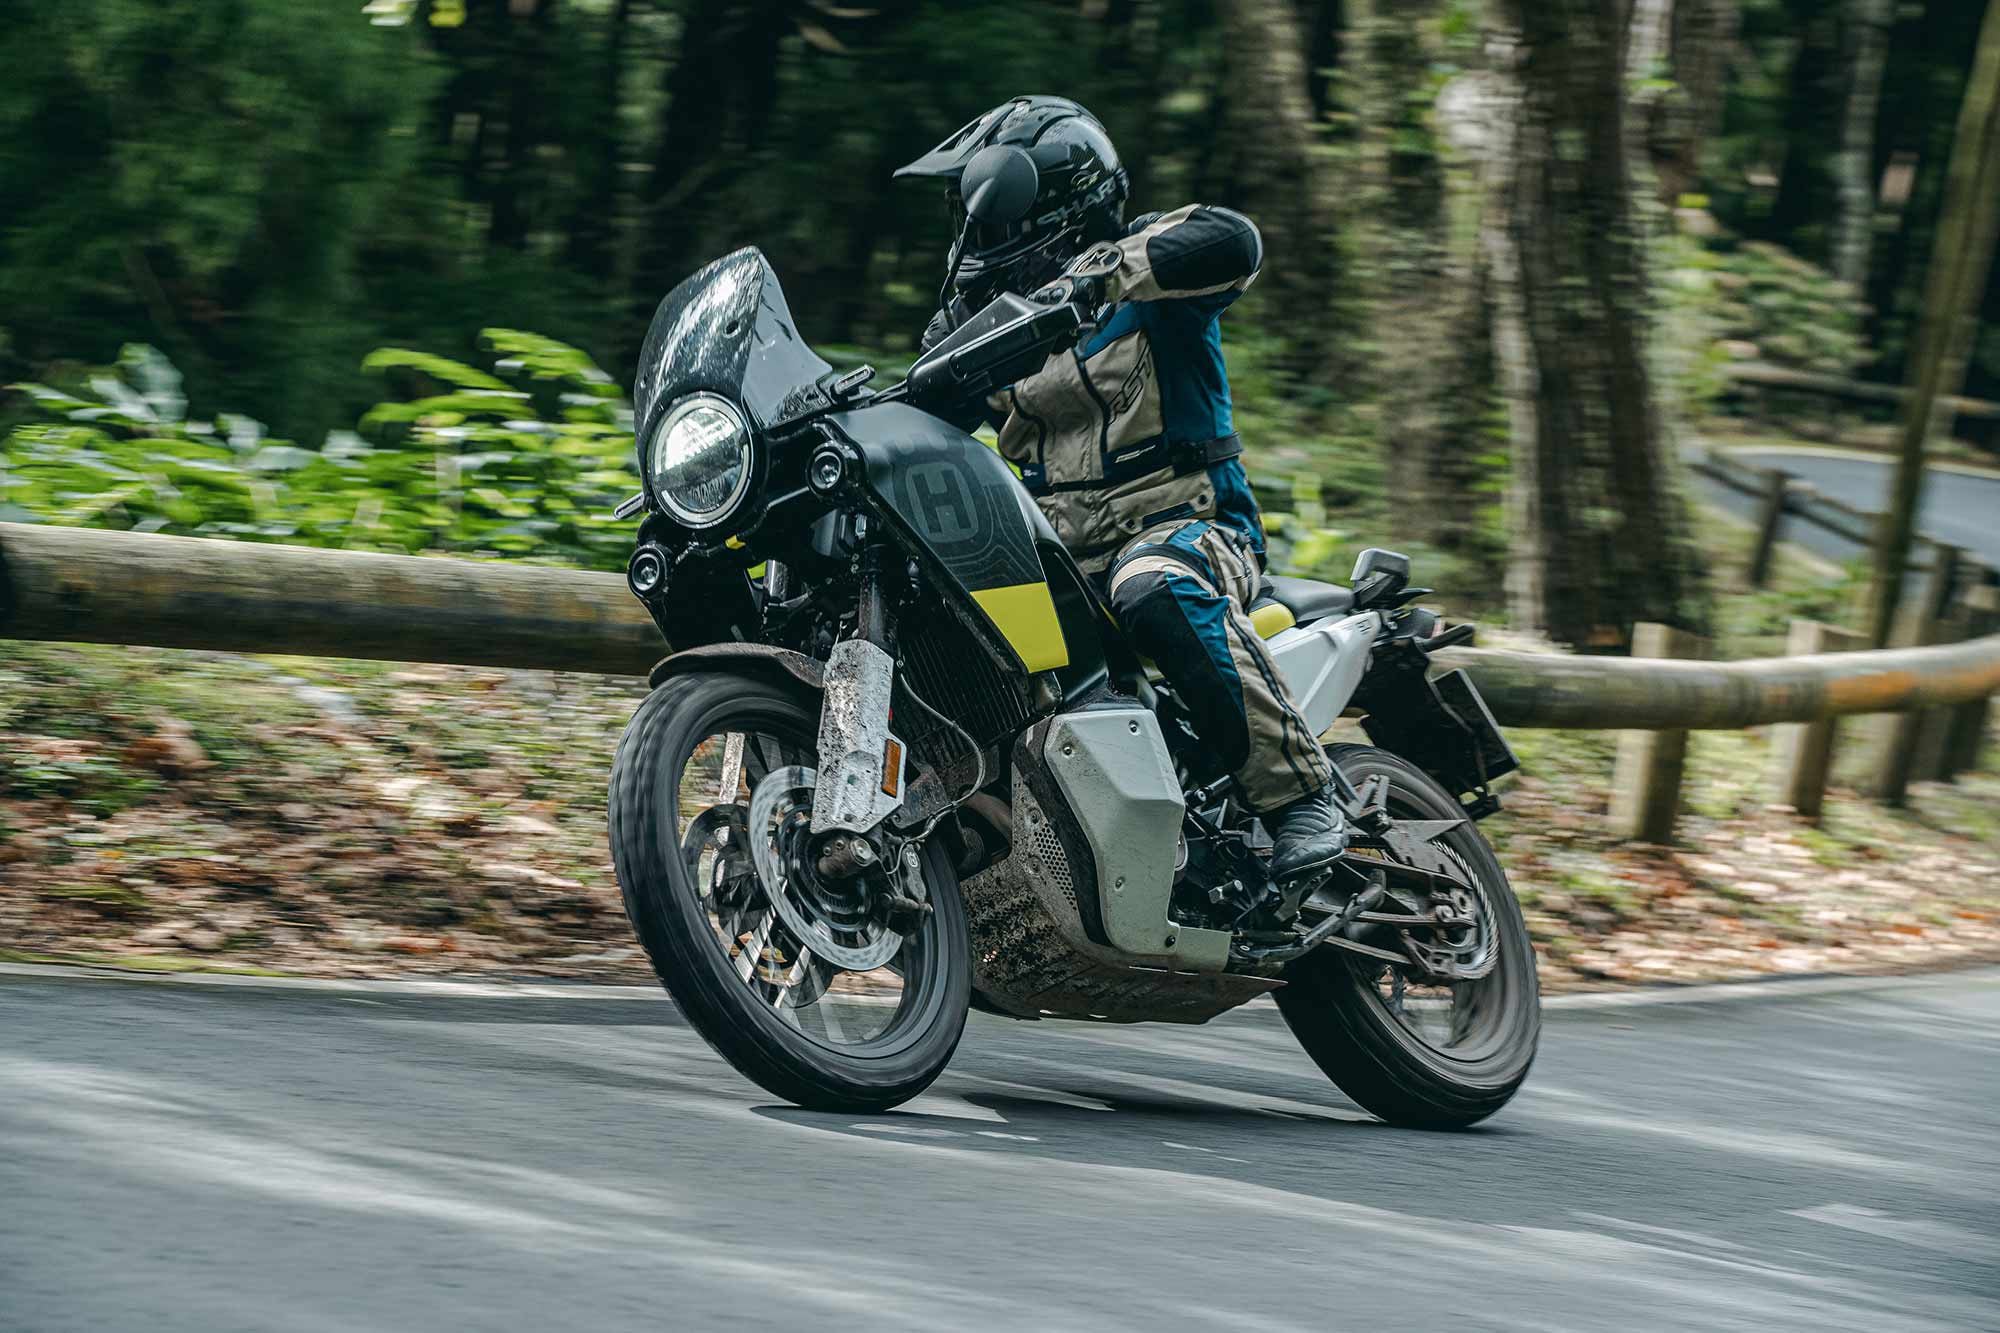 The fuel tank is 1 liter (0.3 gallon) smaller than the KTM 890 Adventure R’s, but runs the same frugal motor. Husqvarna quotes 4.5L/100km or 53 mpg, and I managed 5.1L/100km or 46 mpg.